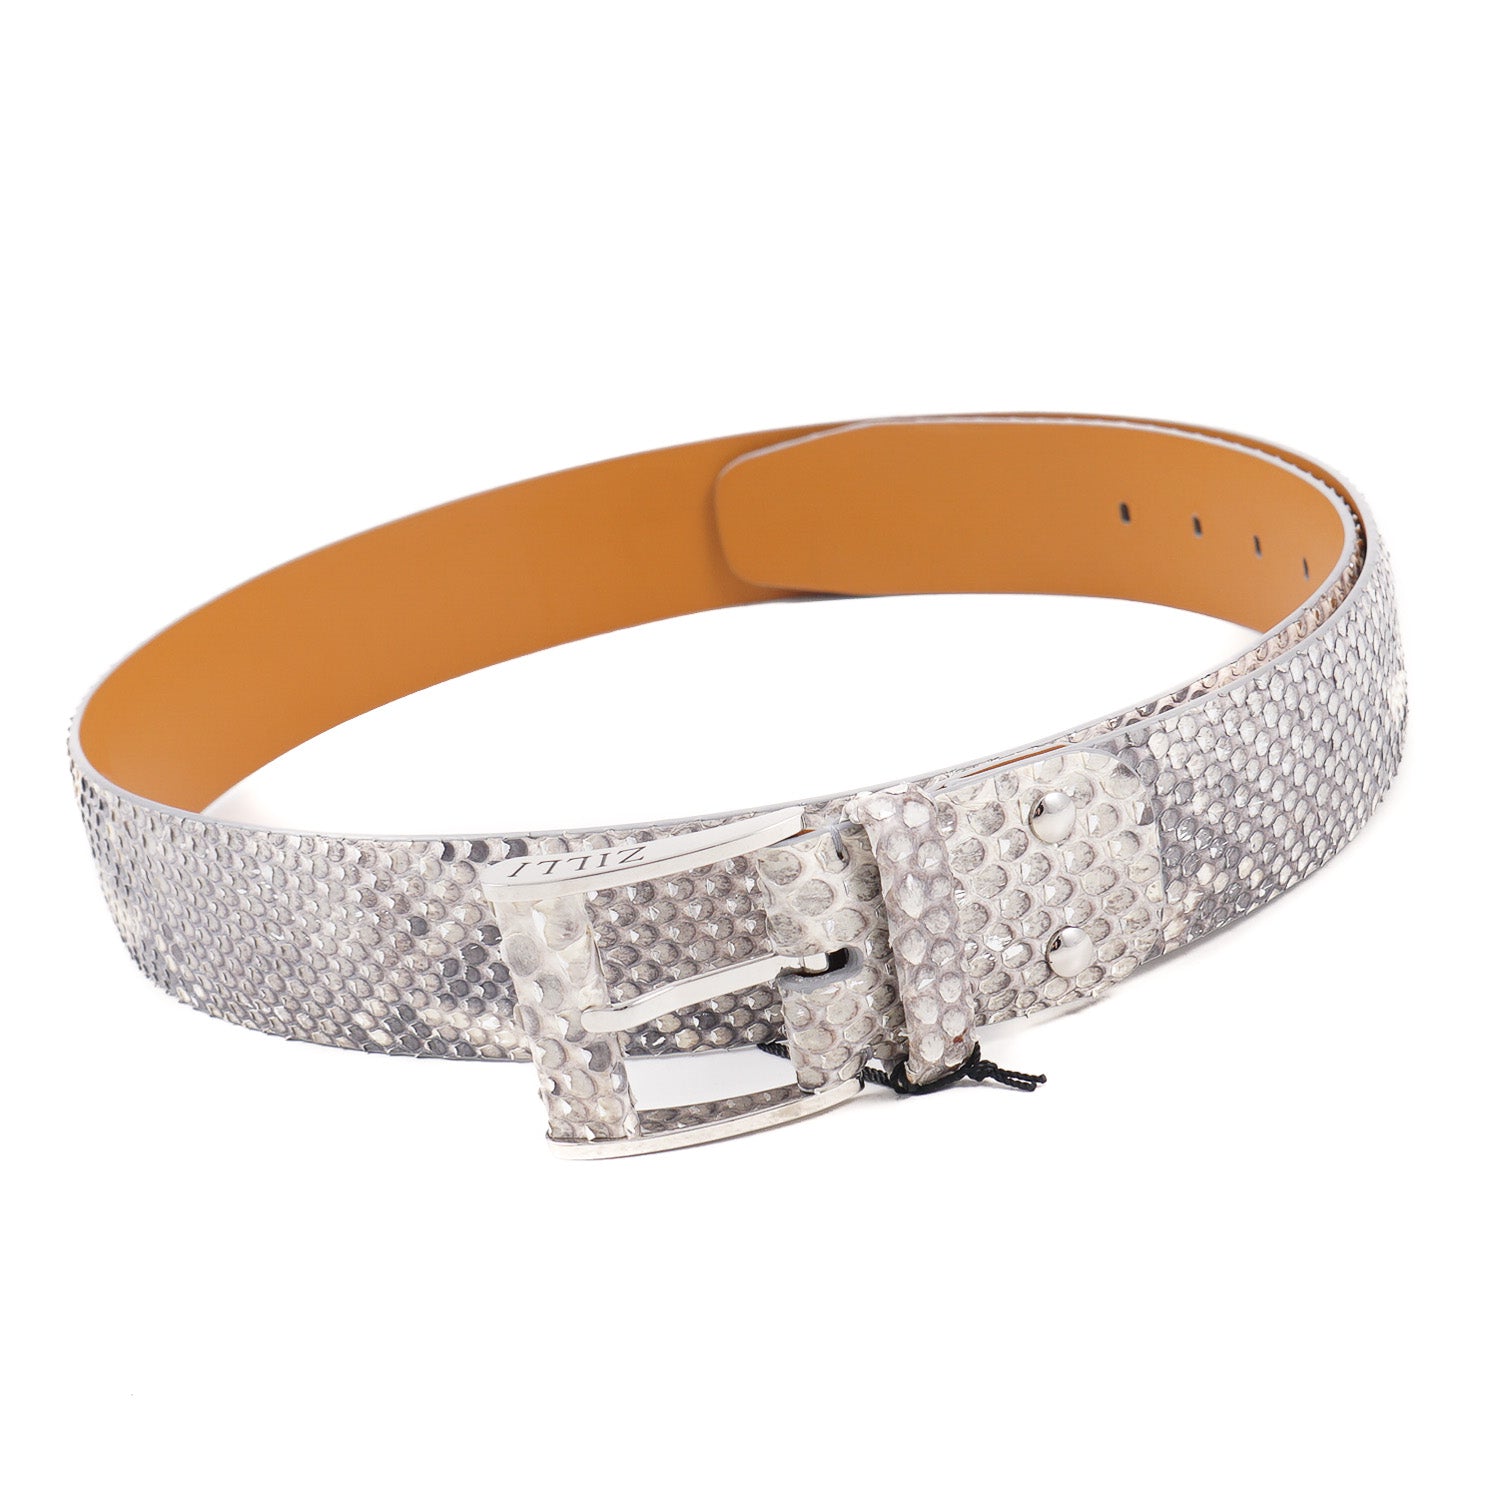 Zilli Belt in Gray and Silver Python - Top Shelf Apparel